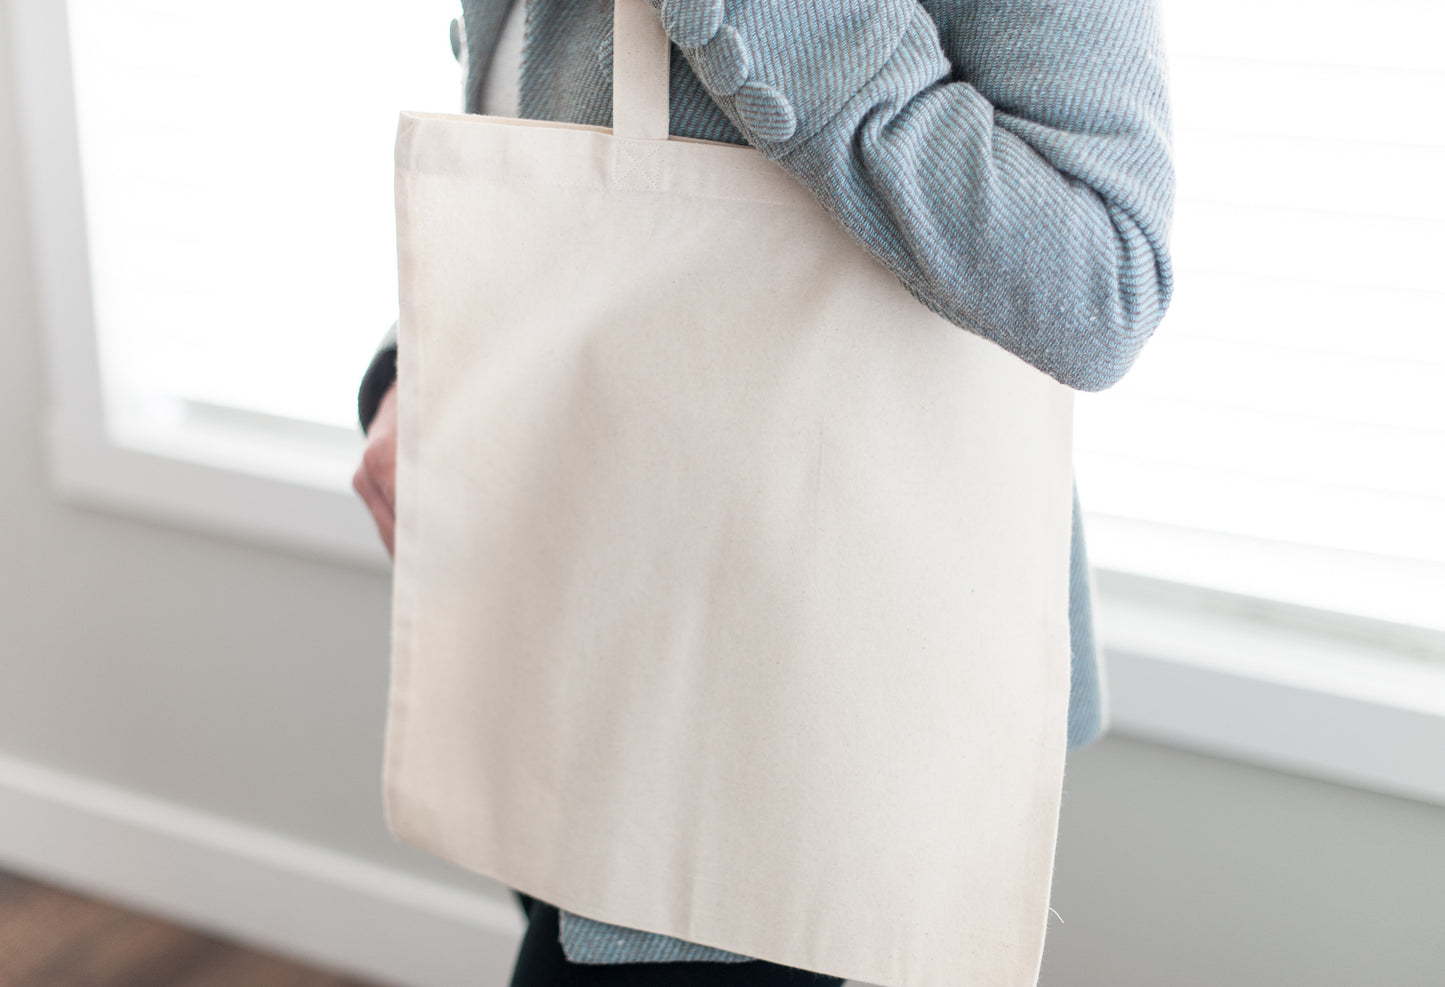 Beautiful things come together one stitch at a time - tote bag